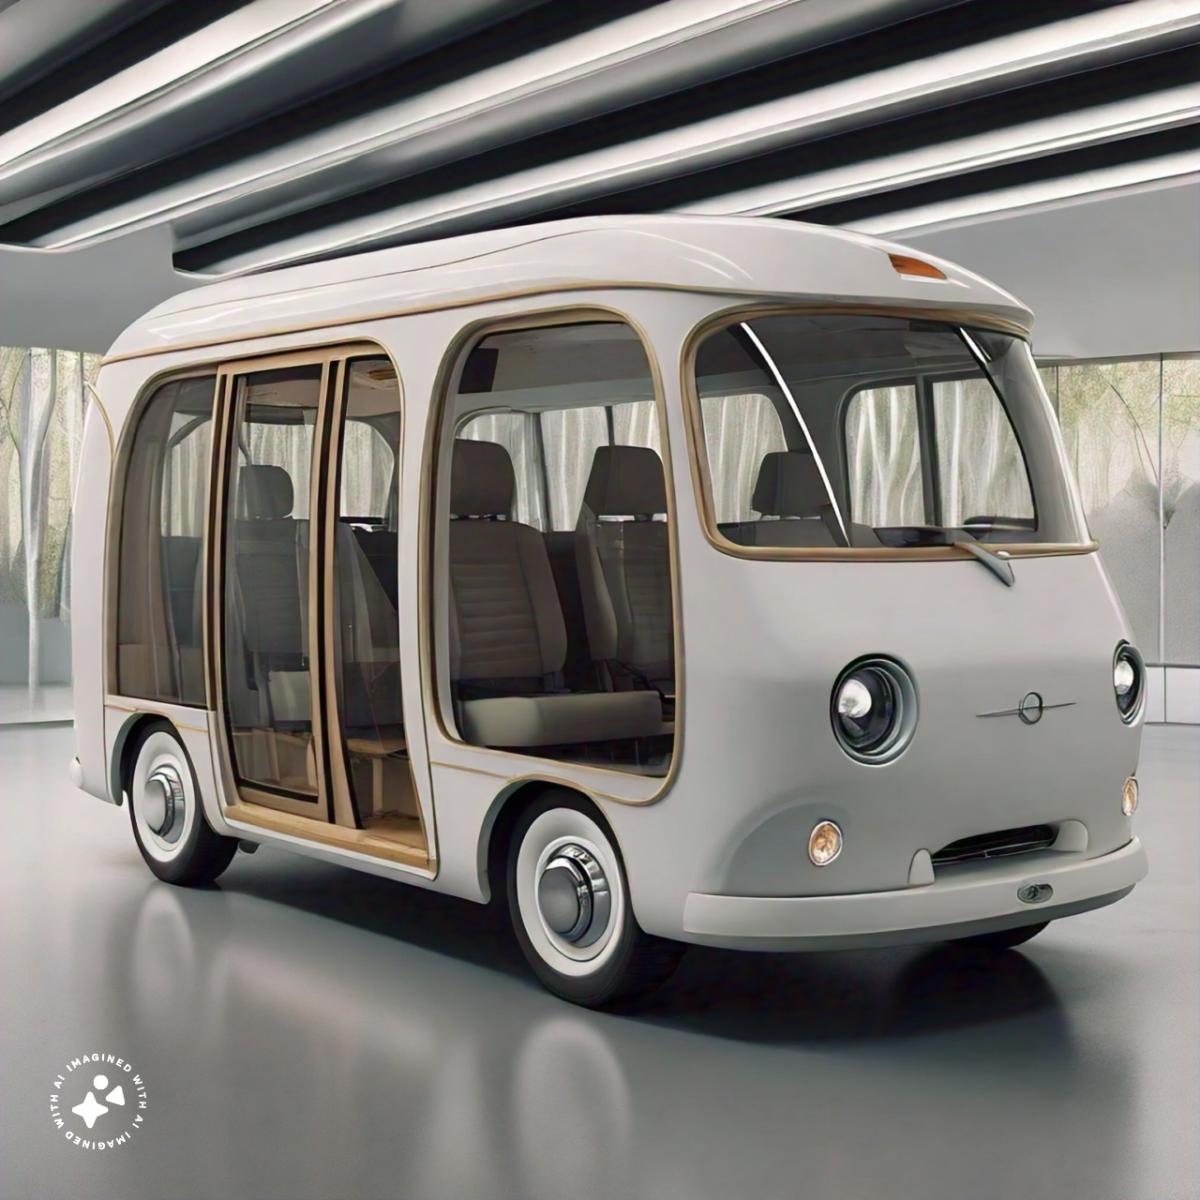 the Apple Car would have been adorable